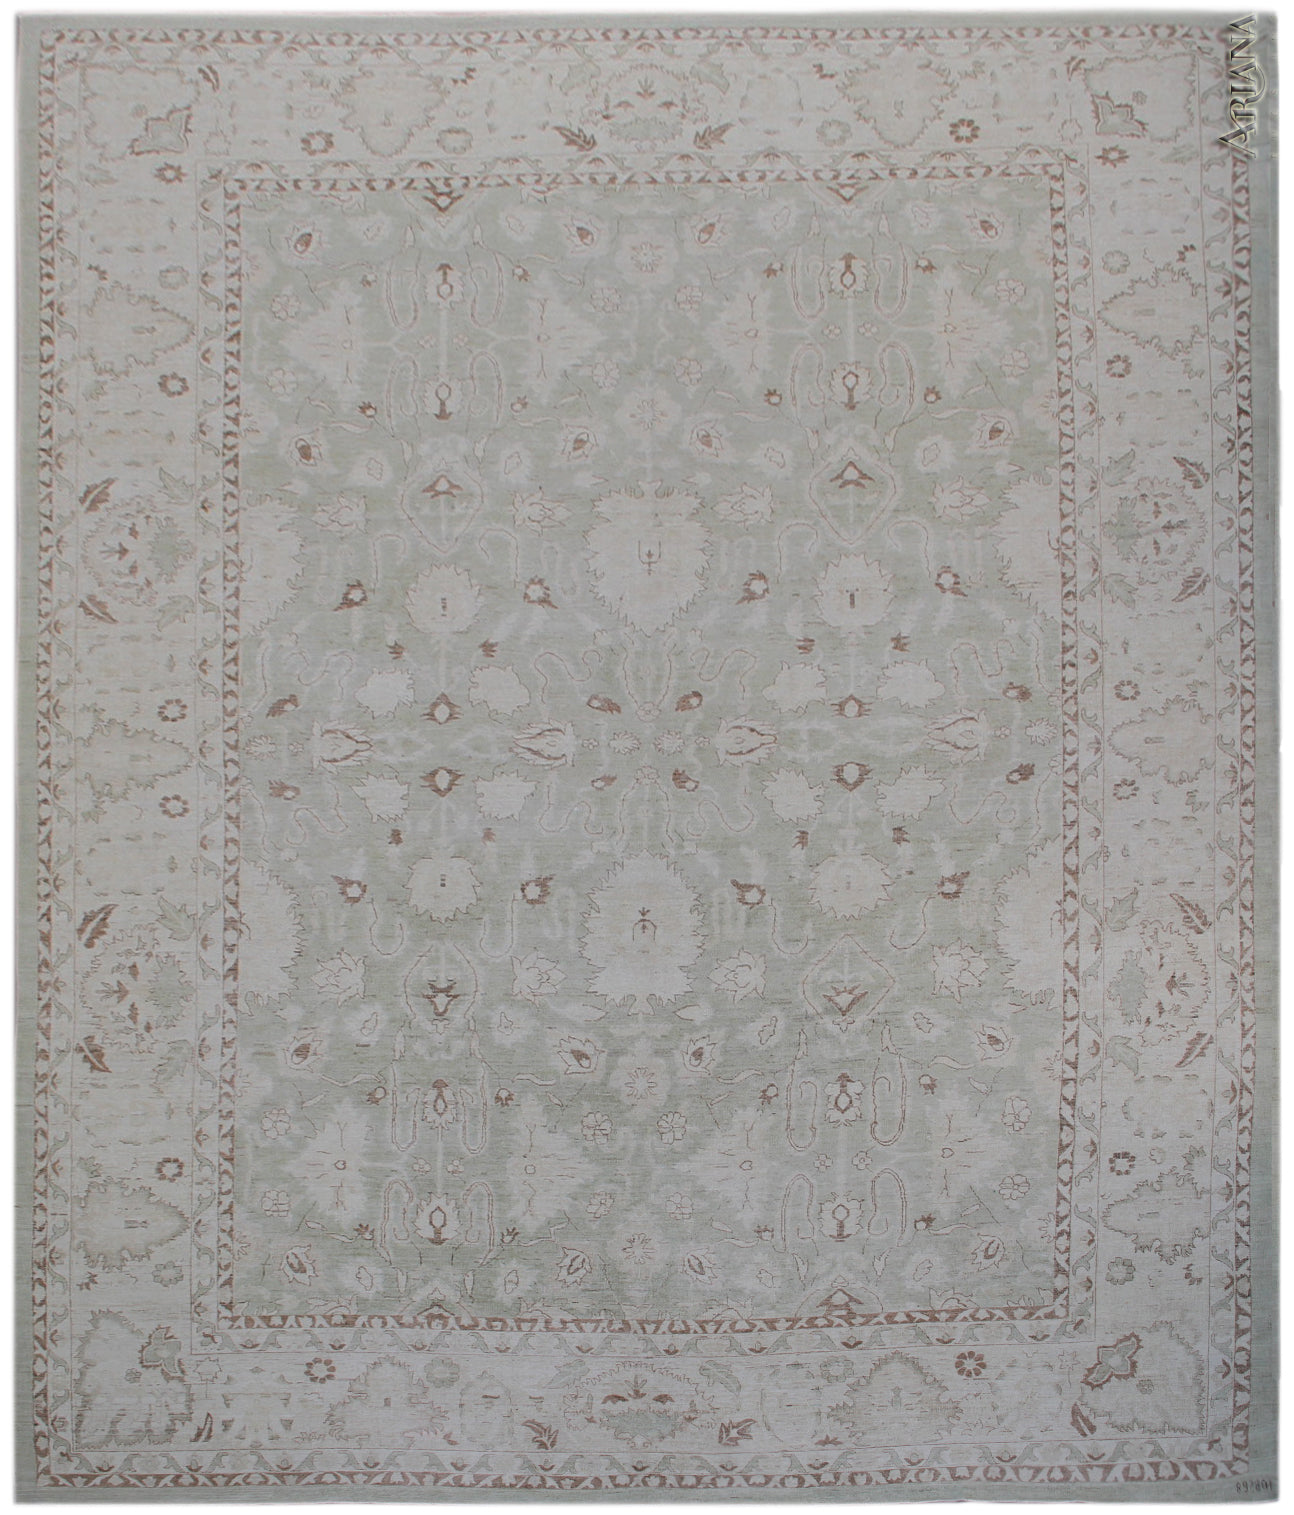 13'x17' Large Ariana Traditional Agra design Green Cream Floral Rug